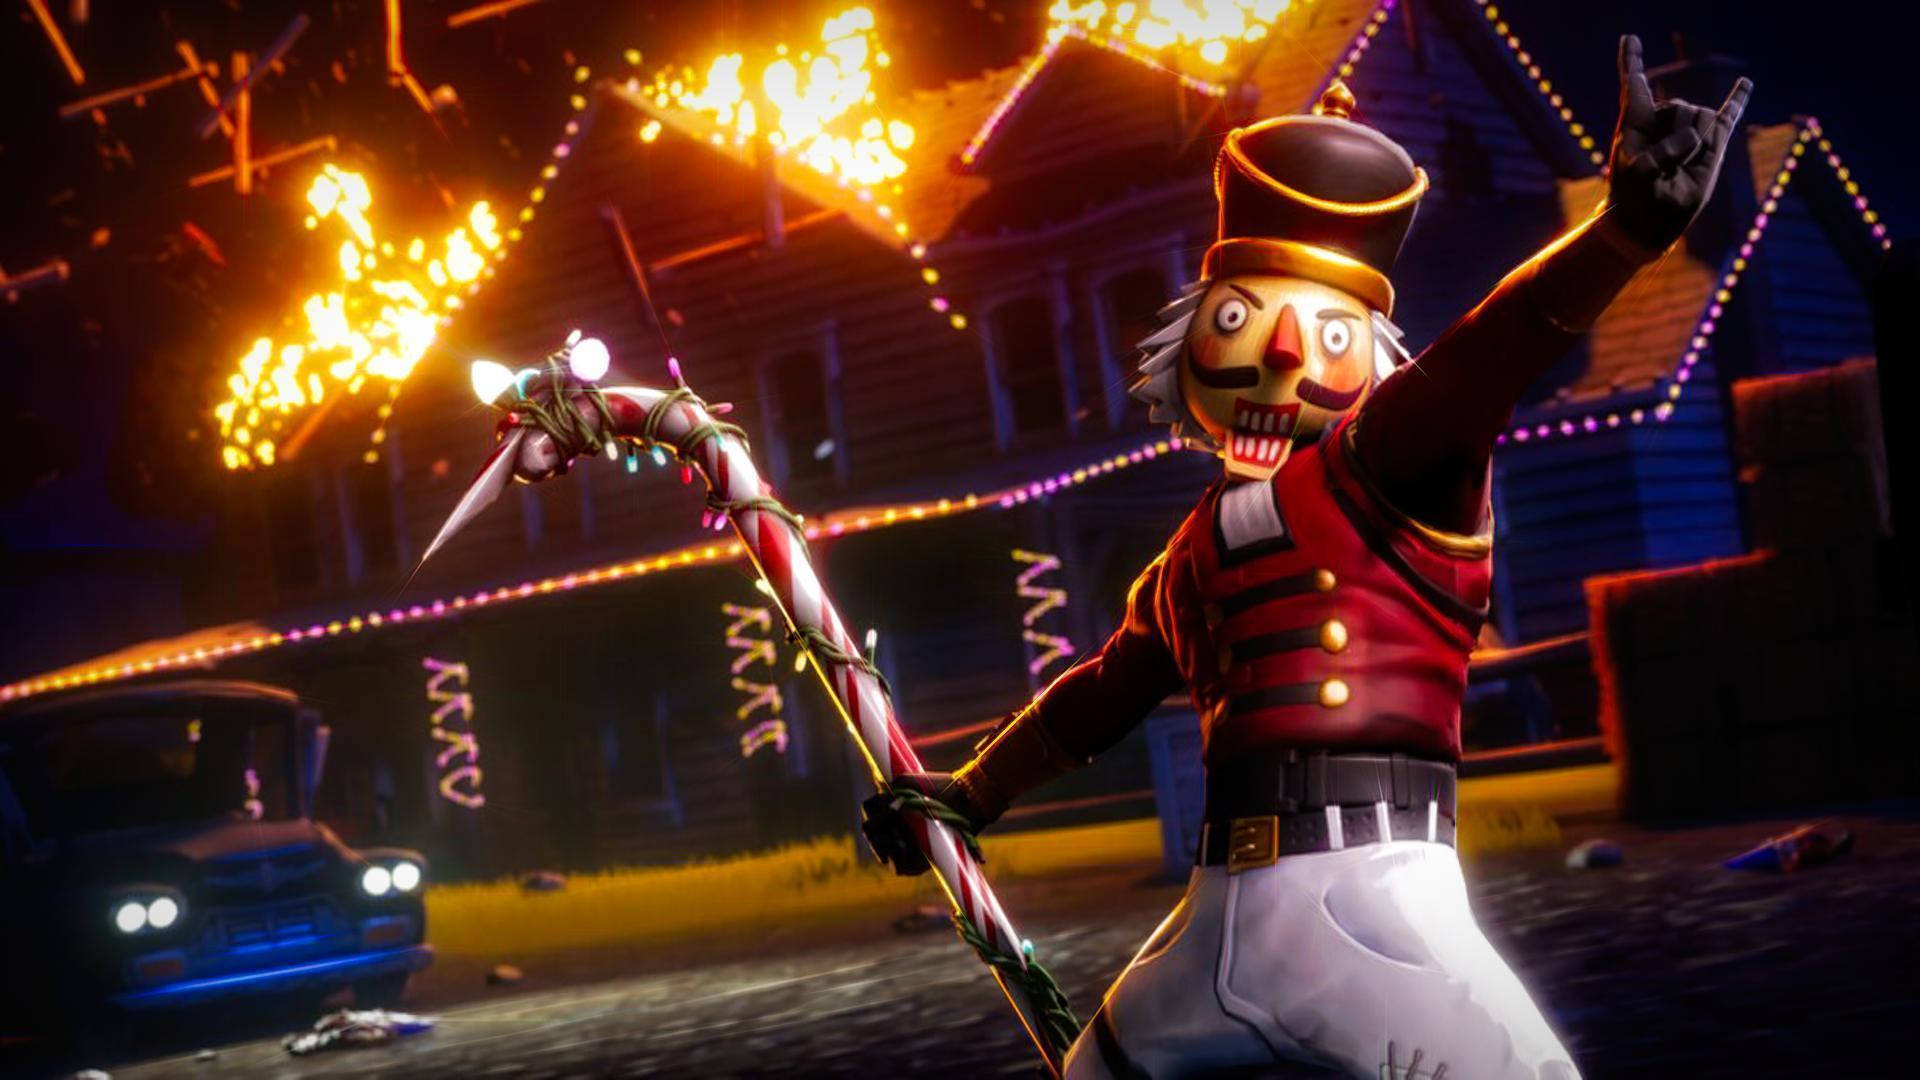 Slay In Style With The Crackshot Skin, Fortnite's Festive Candy Cane Warrior. Background